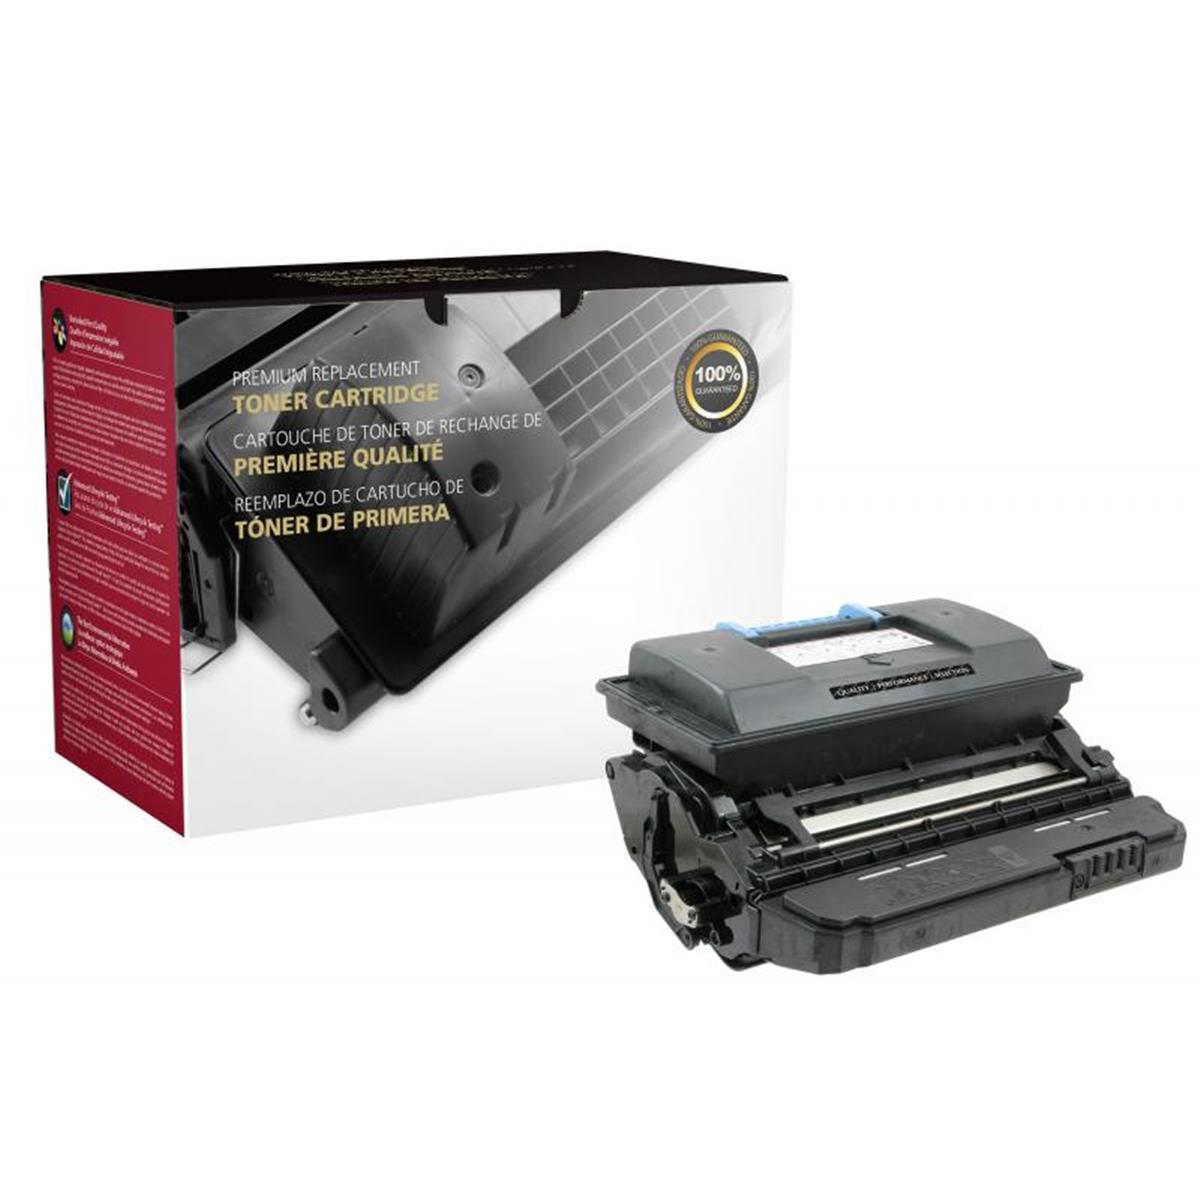 Picture of Dell 200598 High Yield Toner Cartridge for Dell 5330